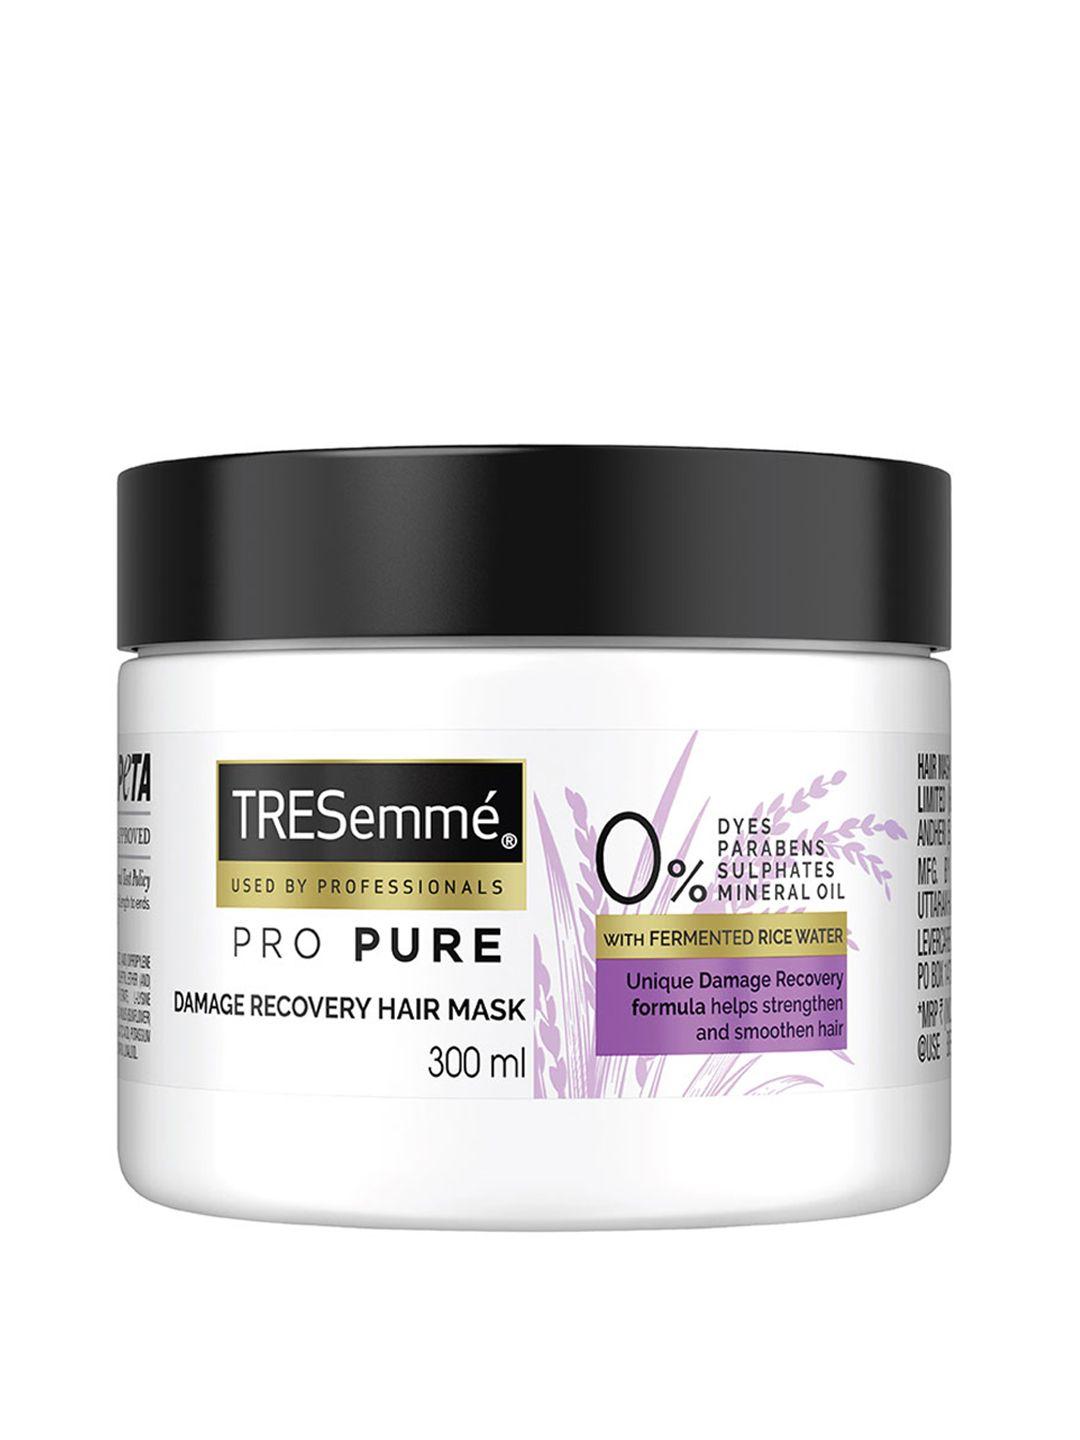 TRESemme ProPure Damage Recovery Hair Mask with Coconut Oil - 300 ml